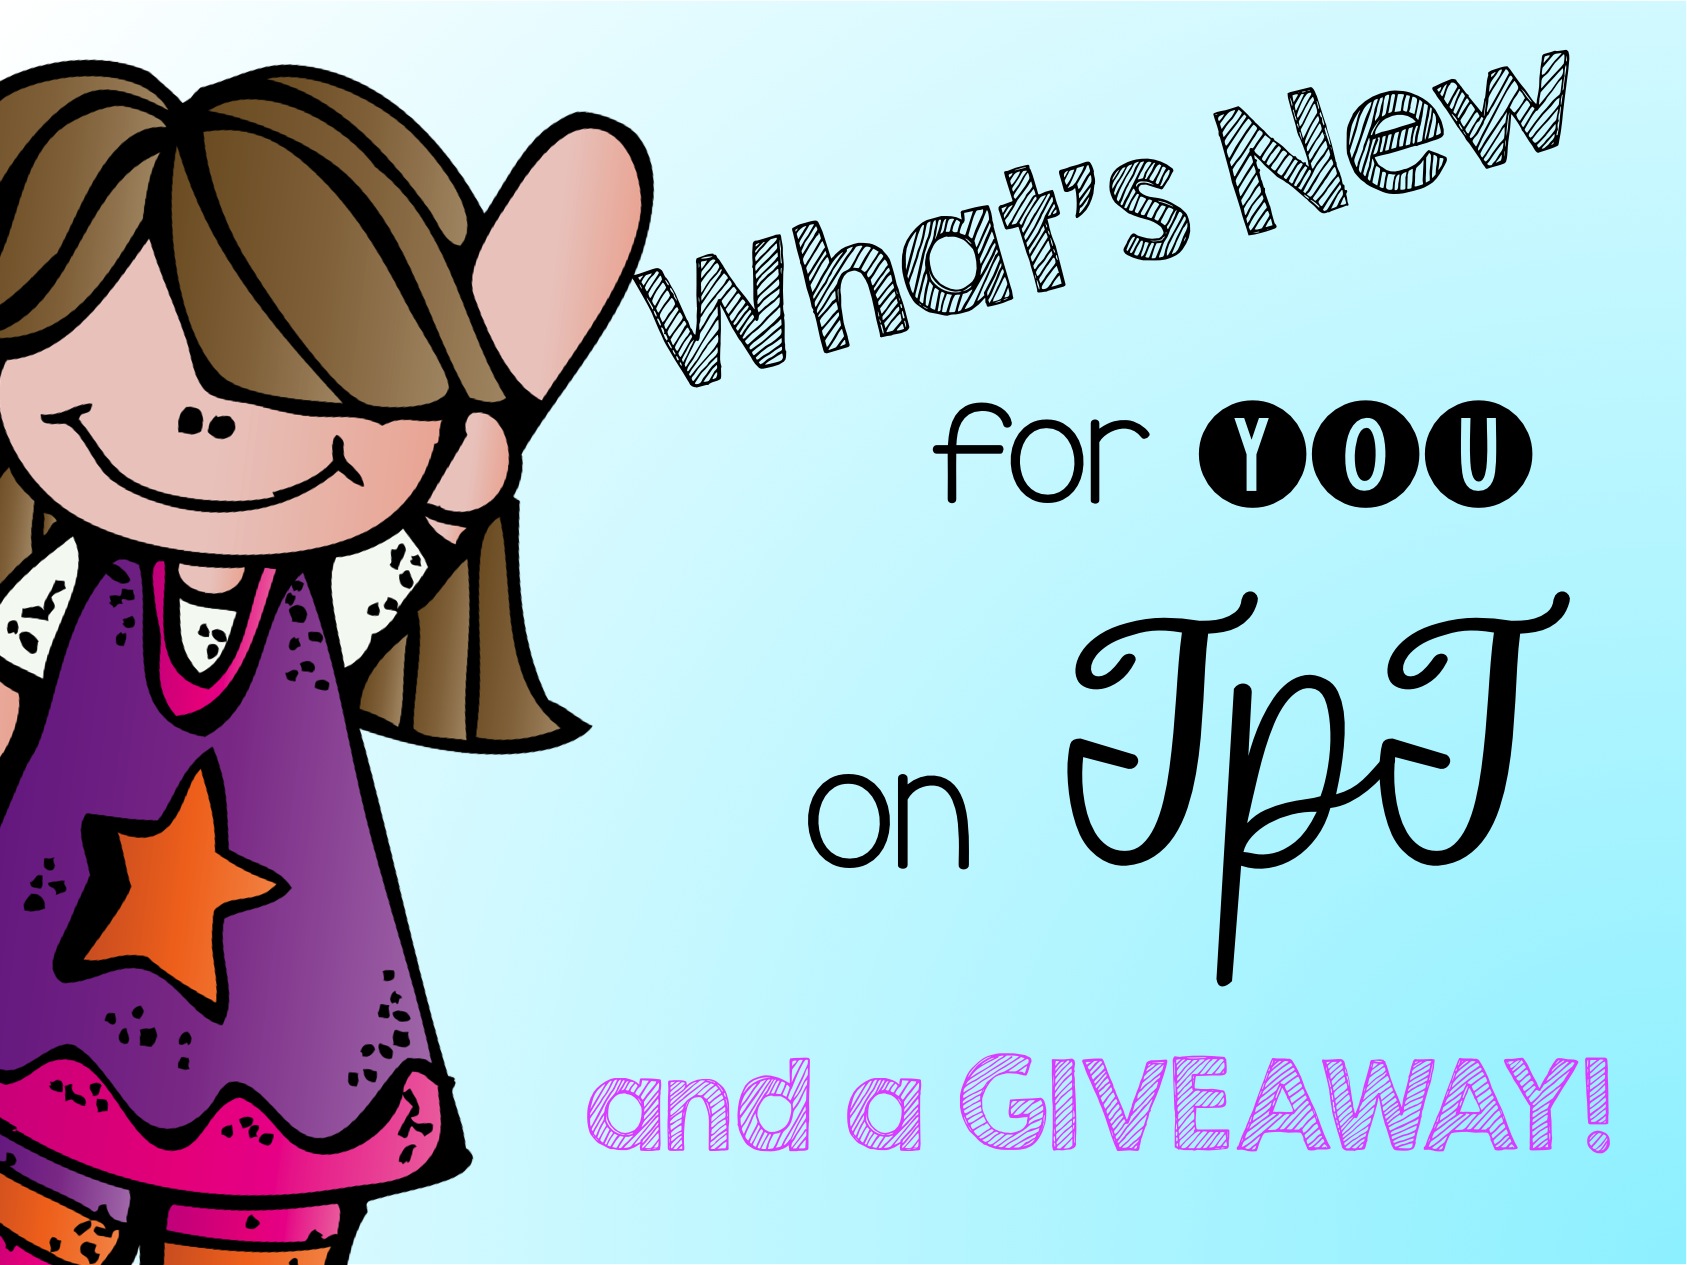 What’s New?… and a GIVEAWAY!